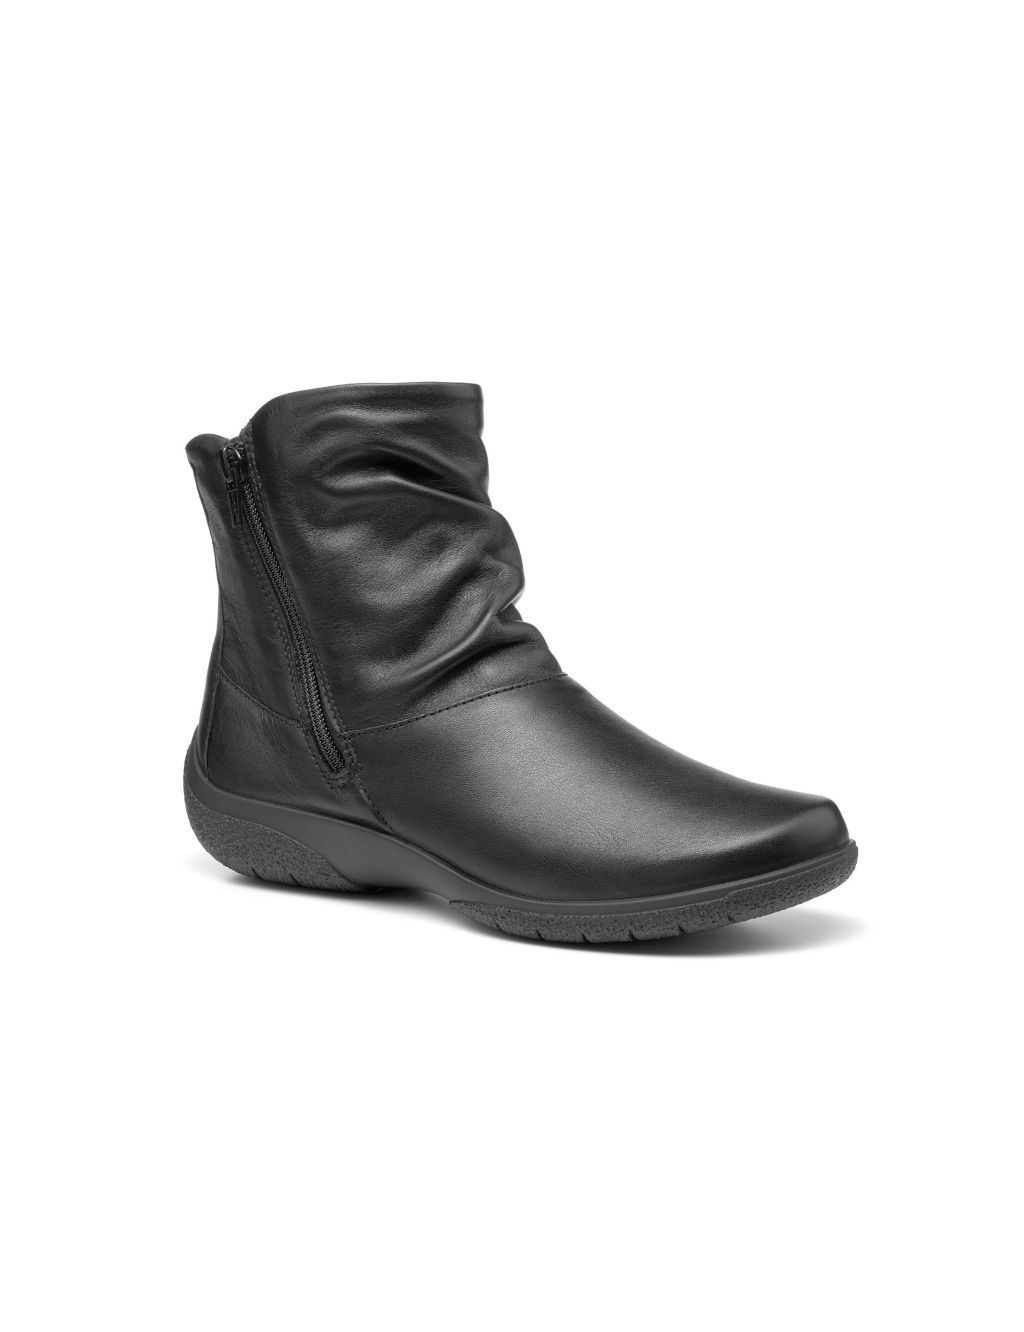 Whisper Extra Wide Fit Leather Ankle Boots | Hotter | M&S